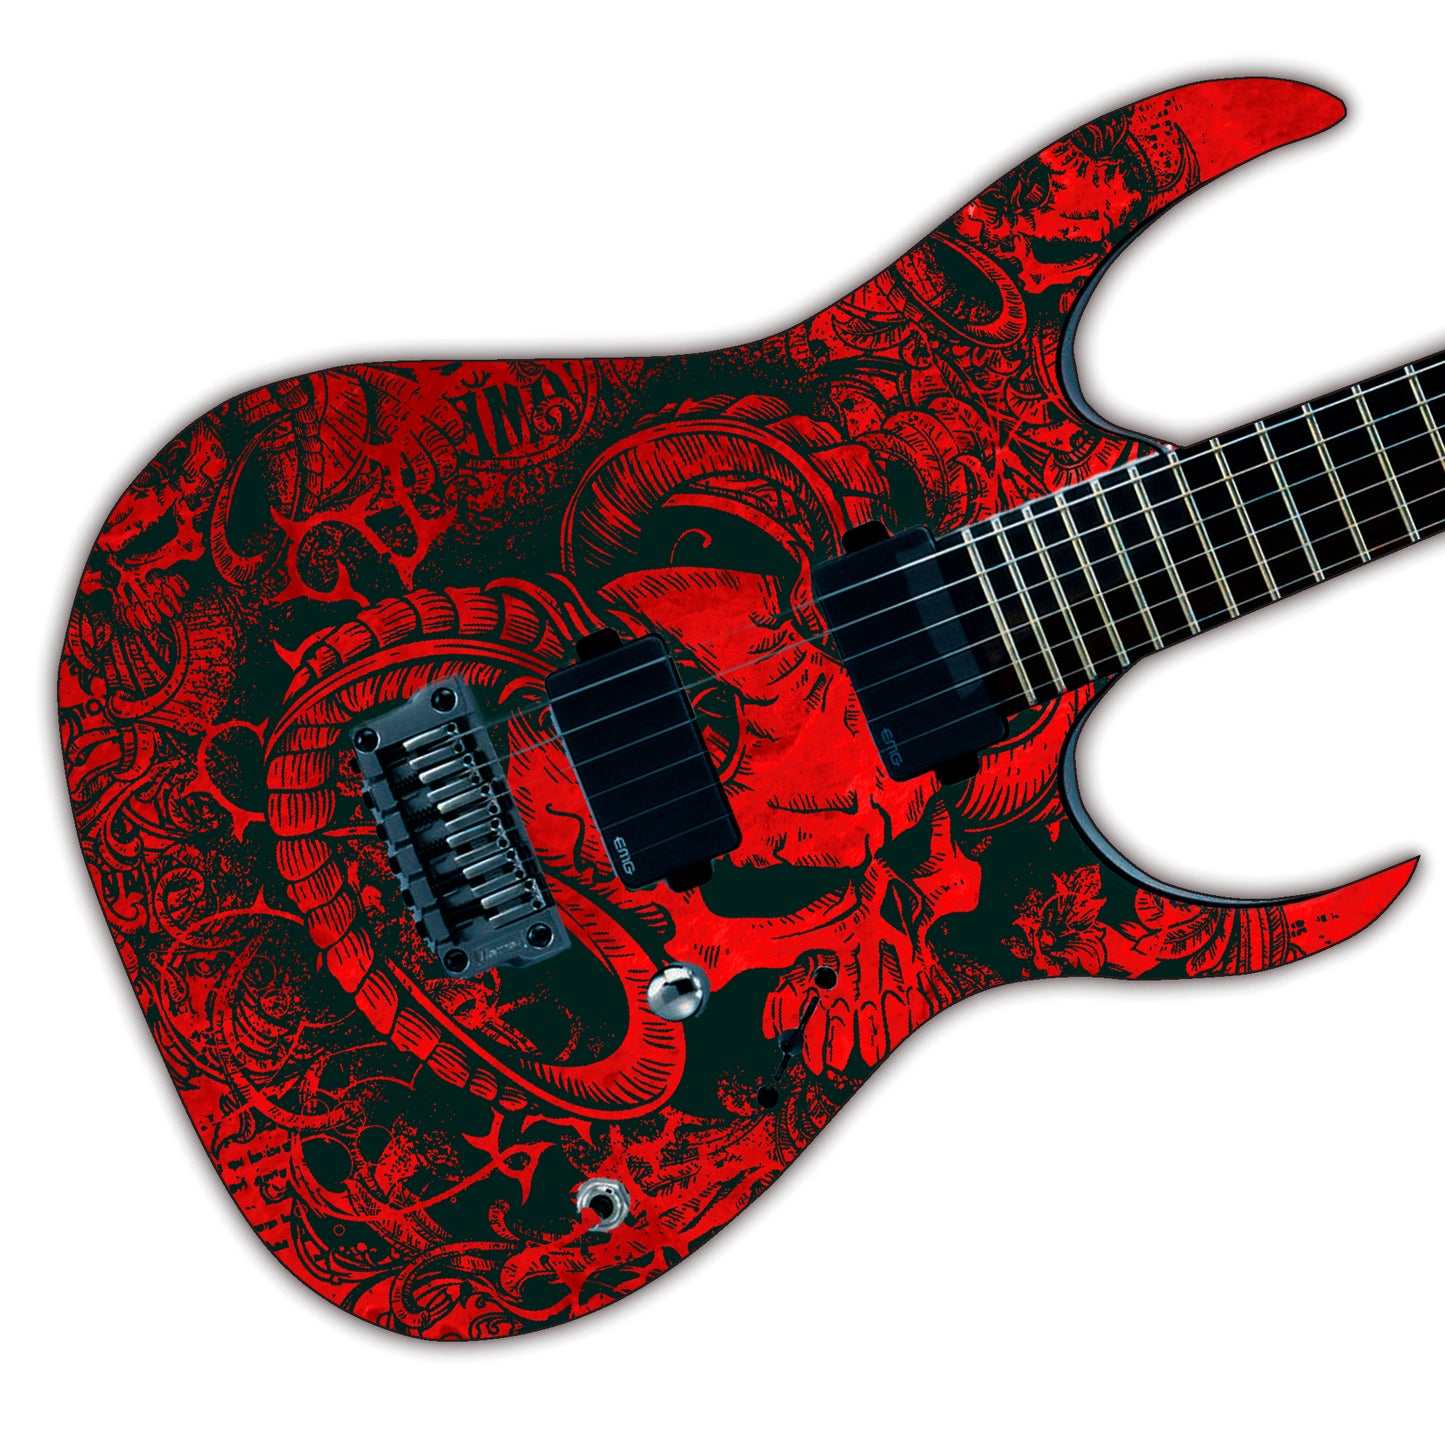 Guitar, Bass or Acoustic Skin Wrap Laminated Vinyl Decal Sticker Death Metal GS91